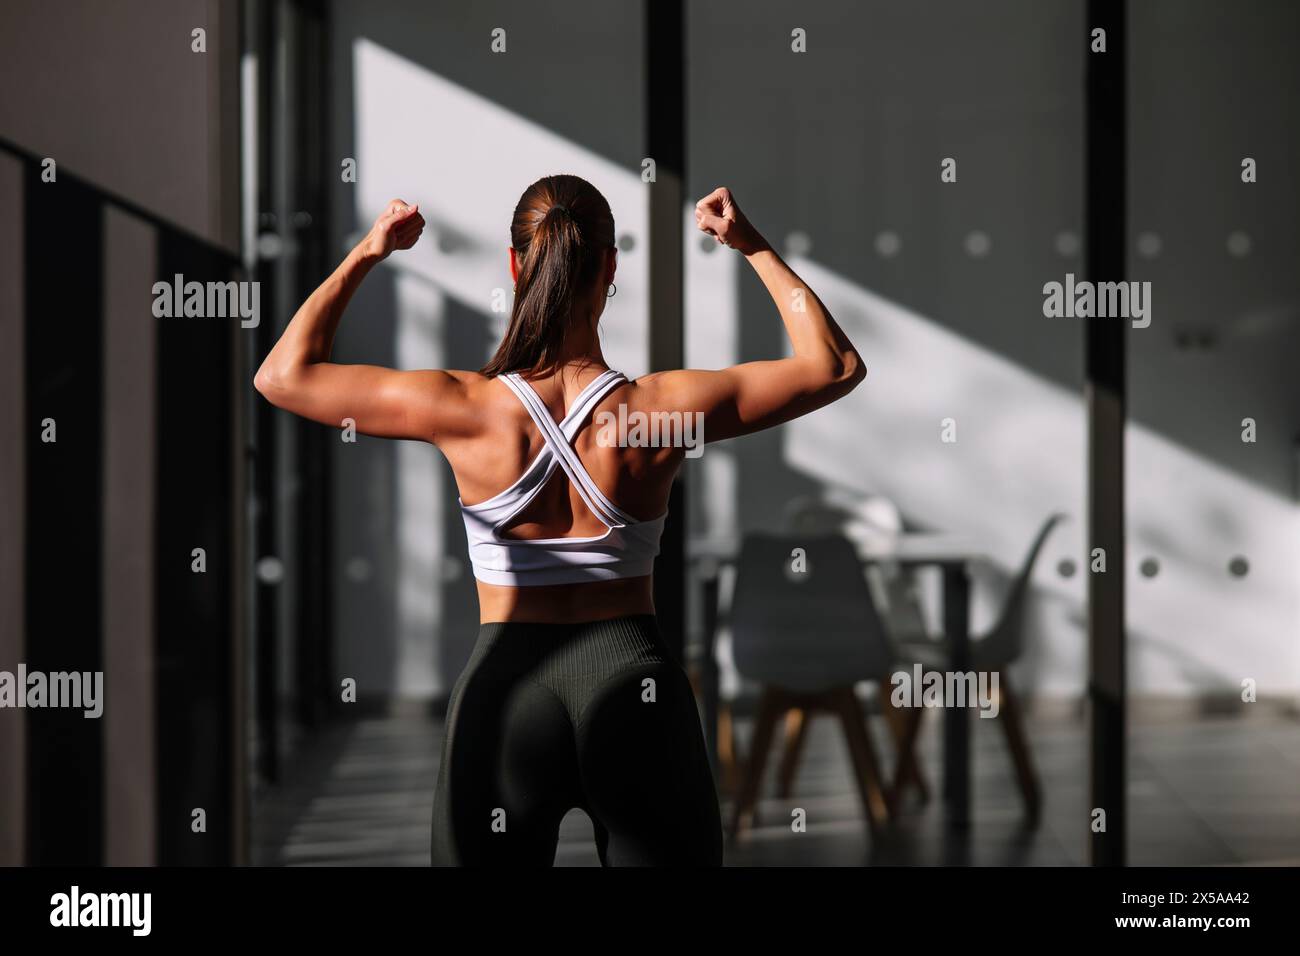 A strong female athlete showcases her toned back muscles while flexing in a modern home environment, displaying fitness and strength Stock Photo